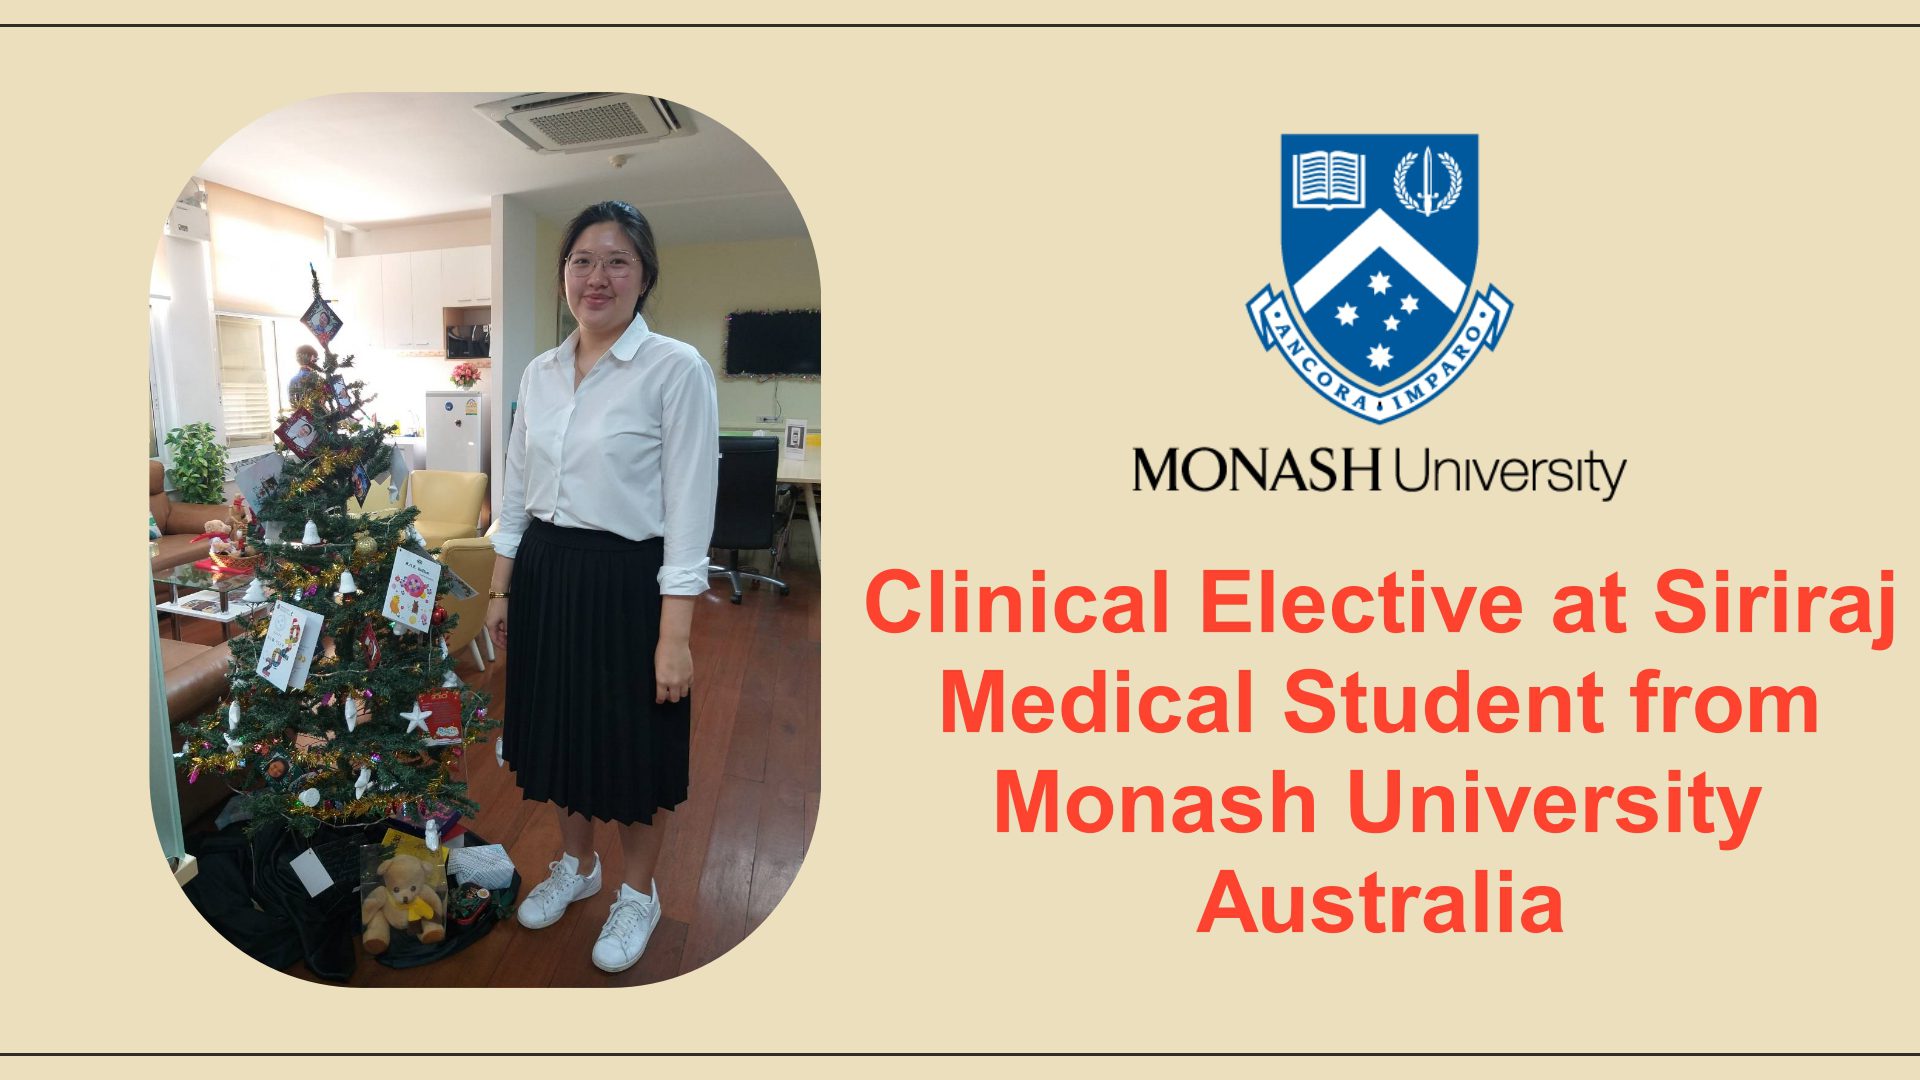 Clinical Elective for Medical Students from Monash University, Australia